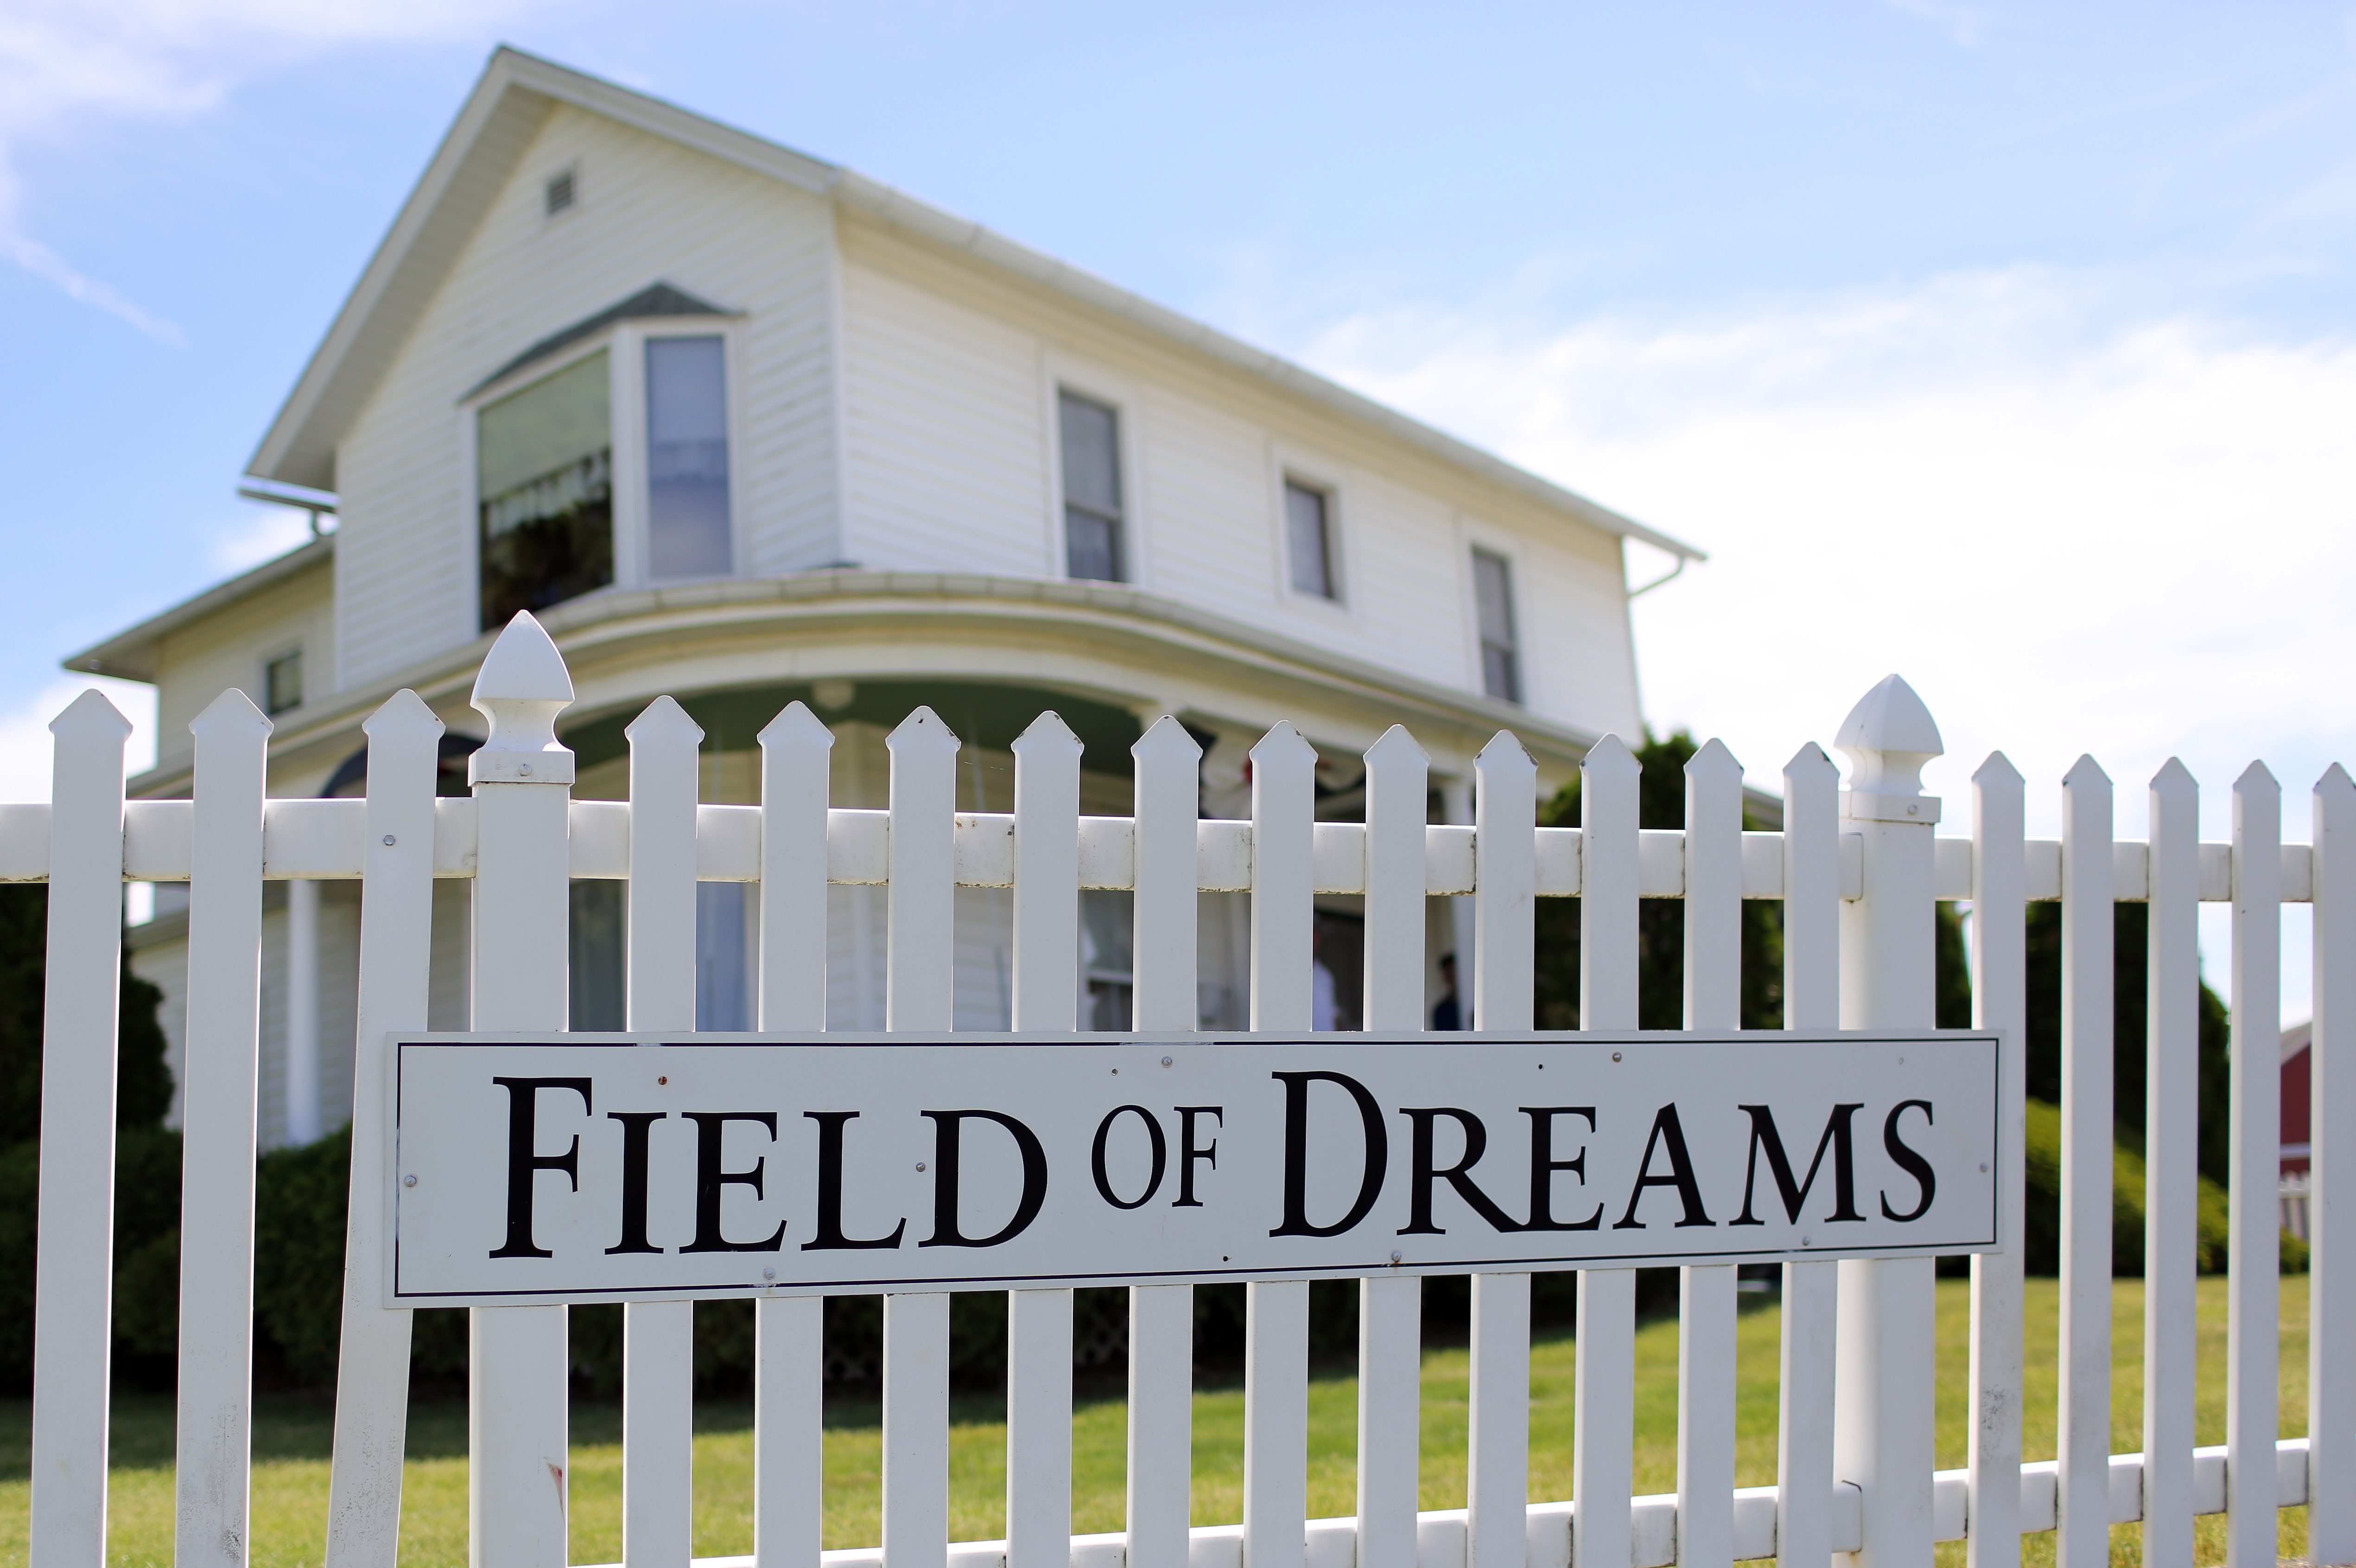 The Field of Dreams house in Dyersville, Iowa. Advertisers are betting big the MLB game on Thursday will be must-see TV.